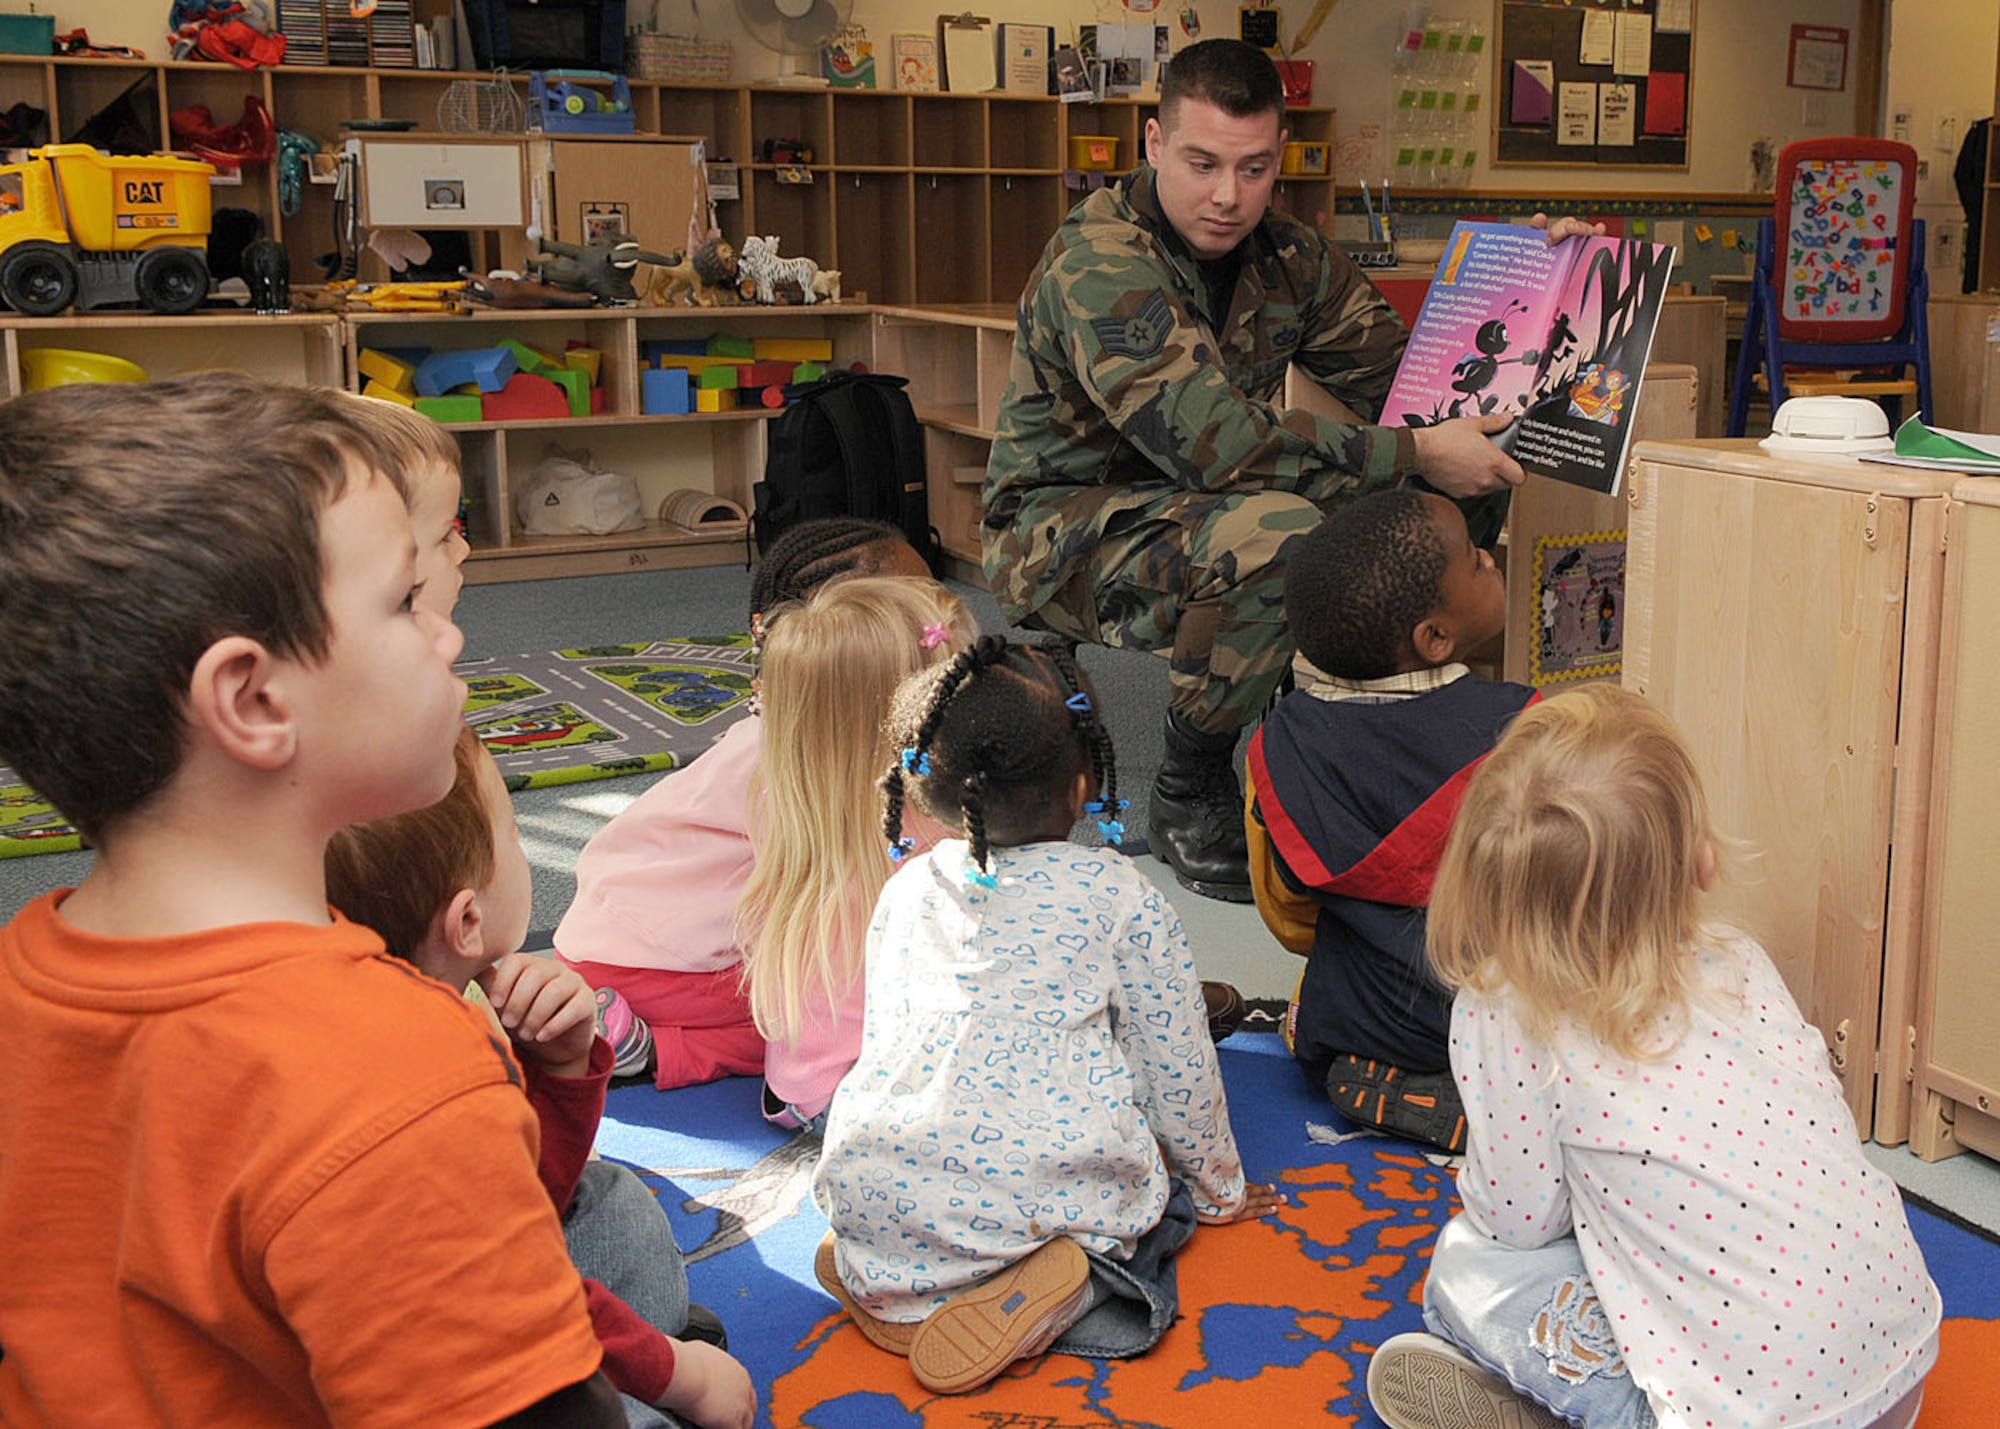 Staff Sgt. Guy Carriveau, a 100th Civil Engineer Squadron firefighter, reads a book to children ages 3 to 5 years old about the importance of fire safety during his visit to the Child Development Center Oct. 6, 2008, at RAF Mildenhall, England. The visit was in support of “Fire Prevention Week” which takes place from Oct. 5 through 11, providing servicemembers and their families helpful tips and information about fire safety. (U.S. Air Force photo by Staff Sgt. Jerry Fleshman)